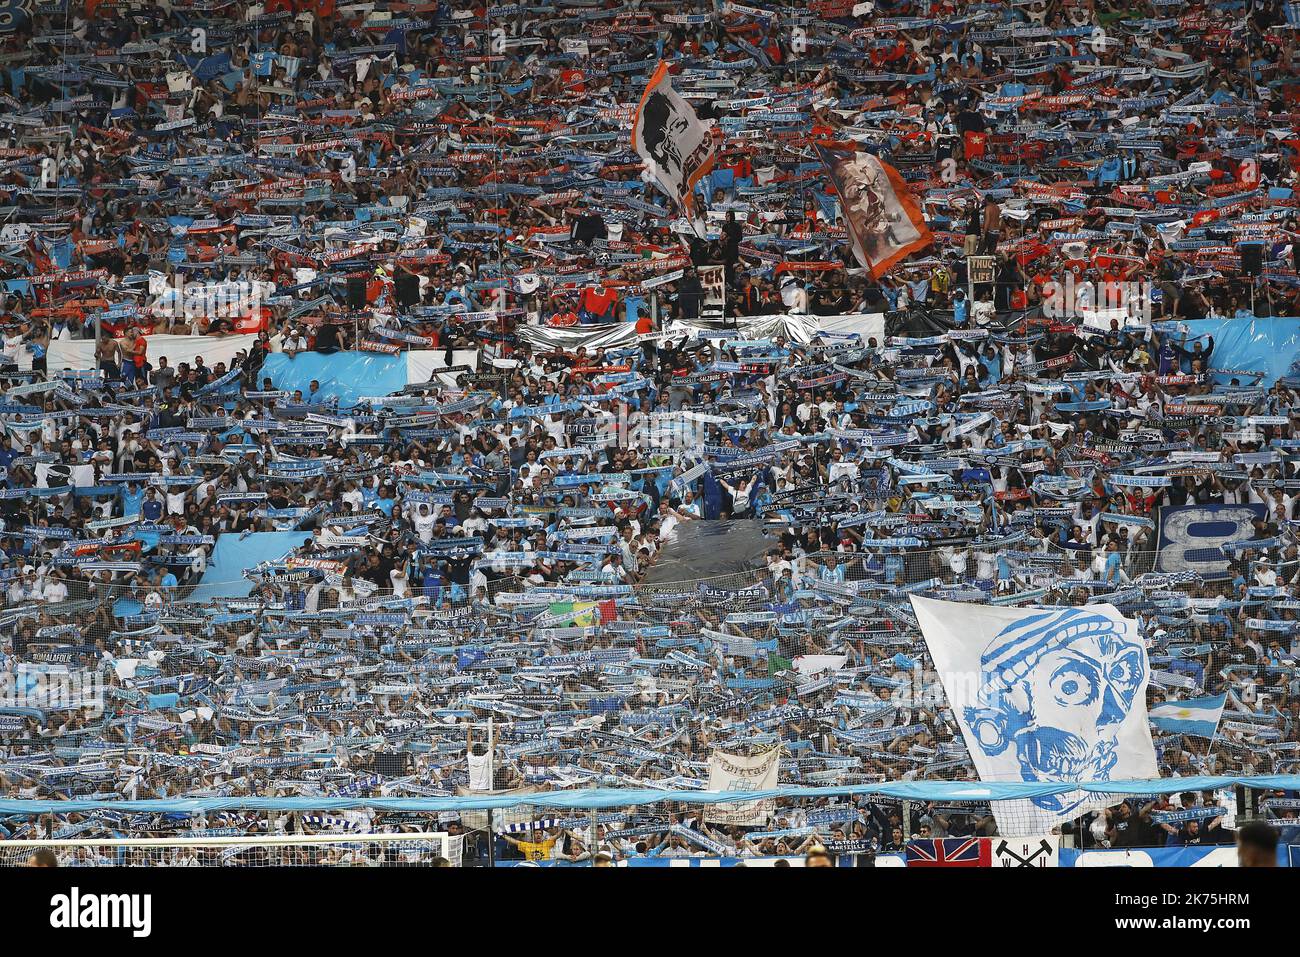 TIFO during the match. Stock Photo